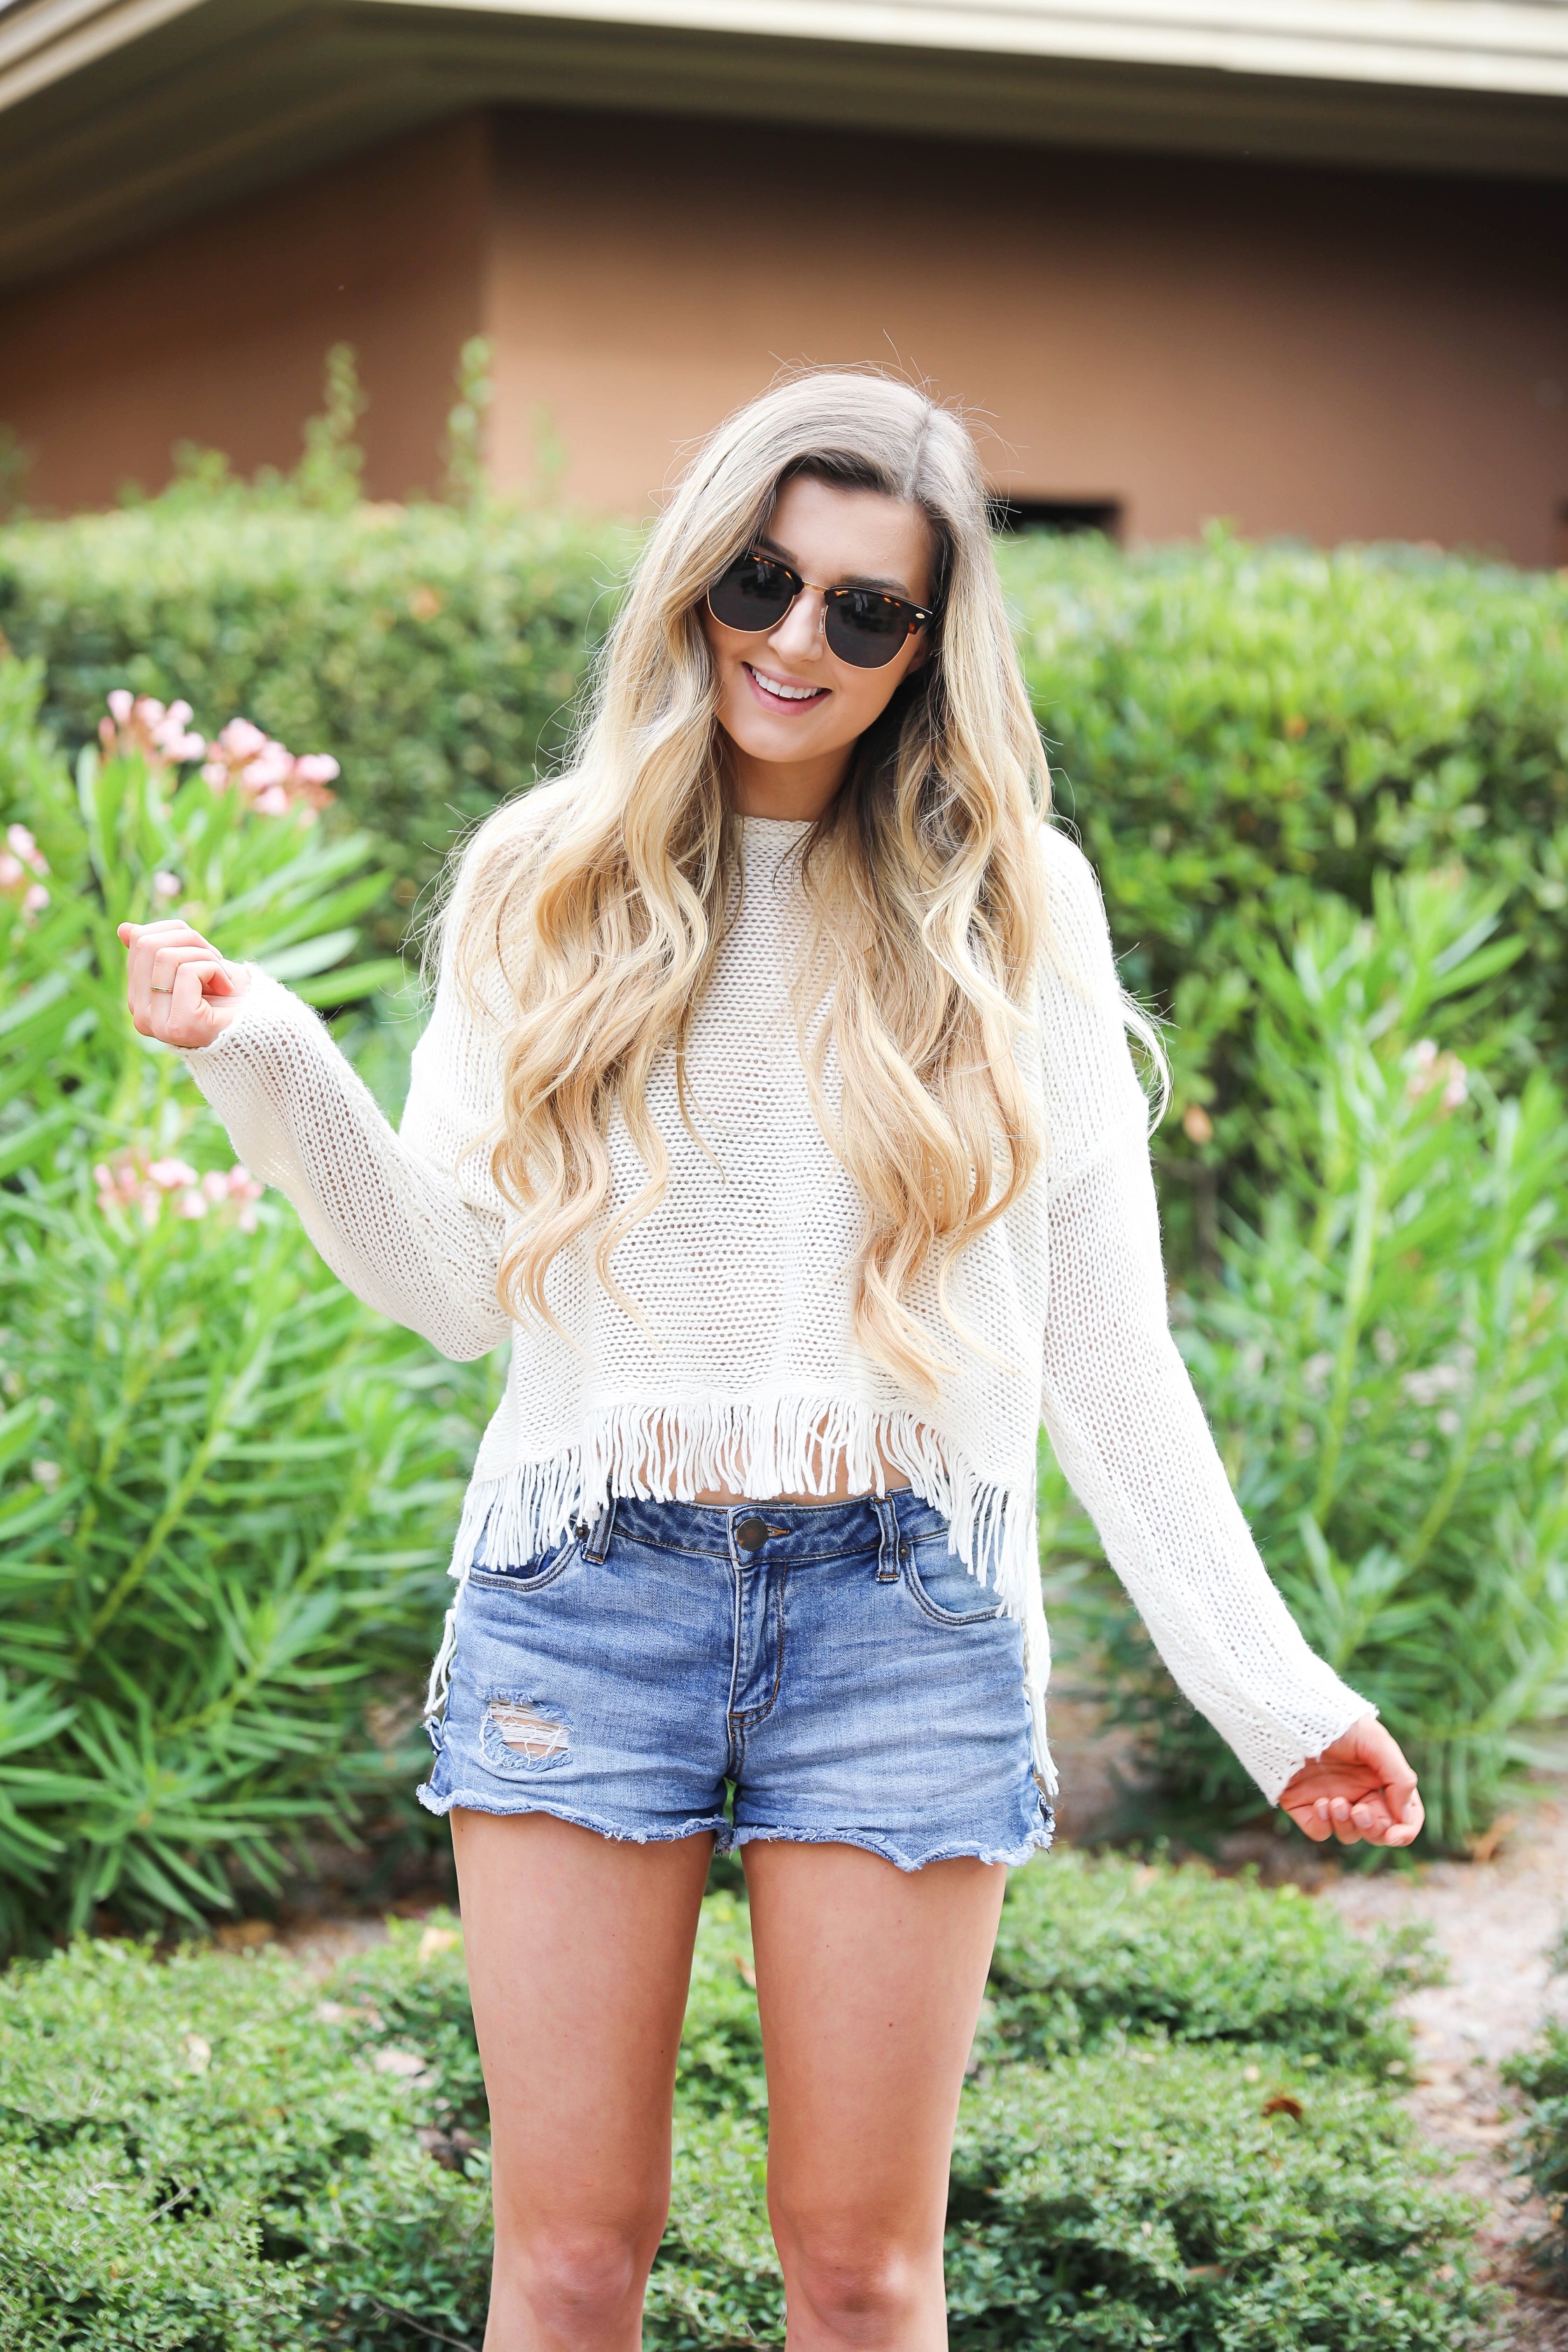 Fringe sweater from Show Me Your Mumu paired with my favorite catus espadrilles shoes! Perfect spring bring break outfit idea! Totally summer vibes on the blog right now! Details on fashion blogger daily dose of charm by lauren lindmark